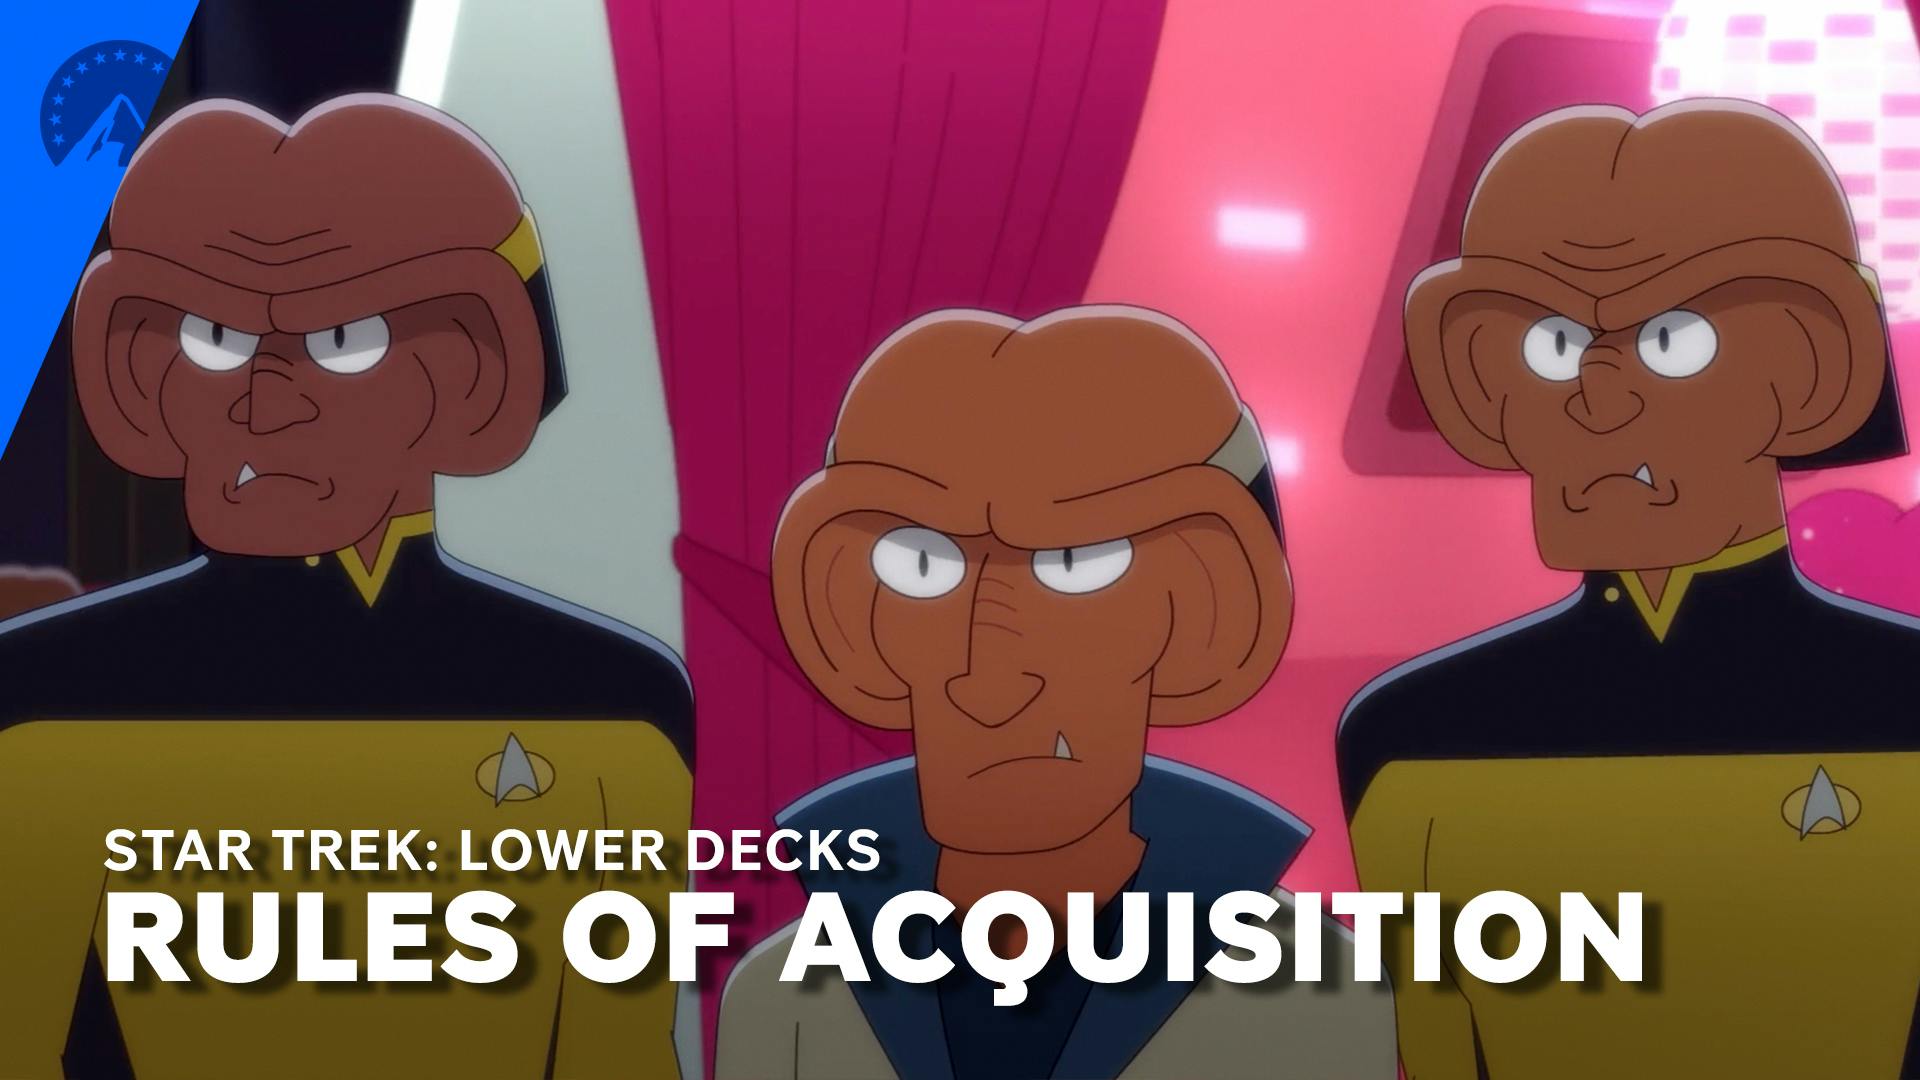 On Ferenginar, three Ferengi (one restaurant host and two servers dressed as Starfleet officers) look ahead at their patrons in 'Parth Ferengi's Heart Place'